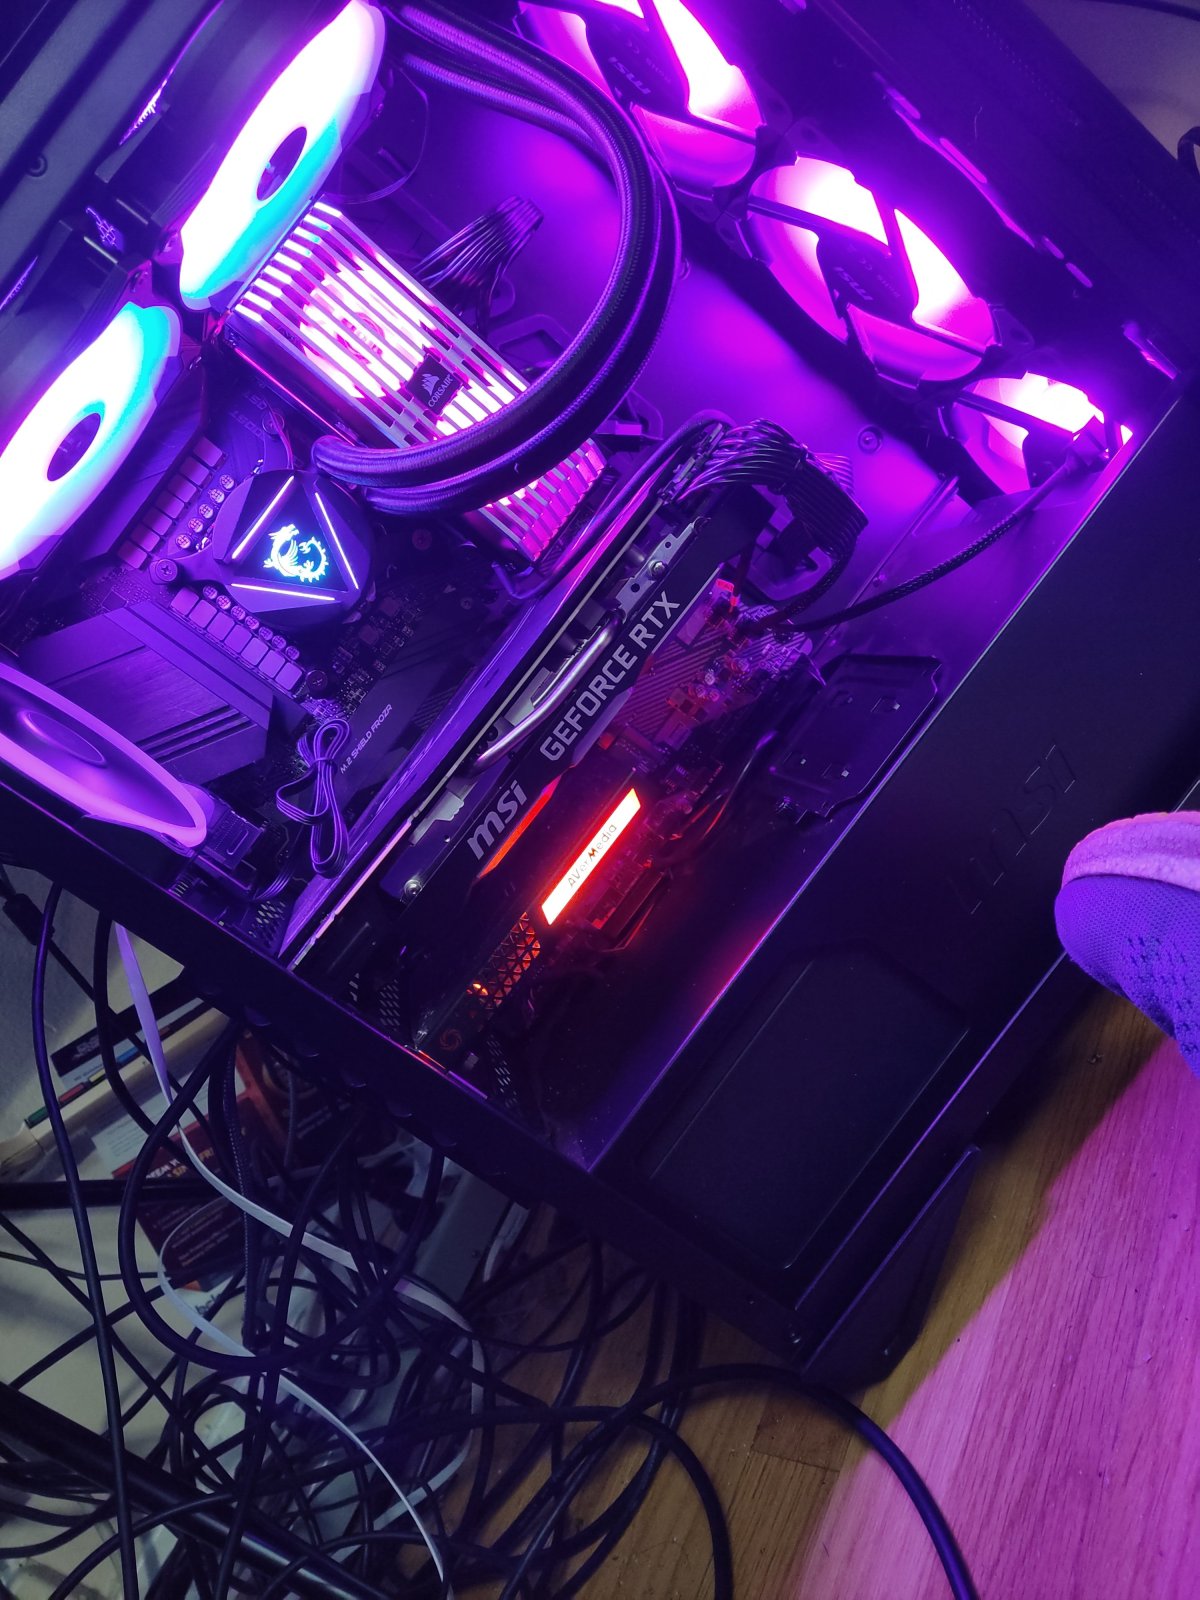 AIO Cooler, the time has come!